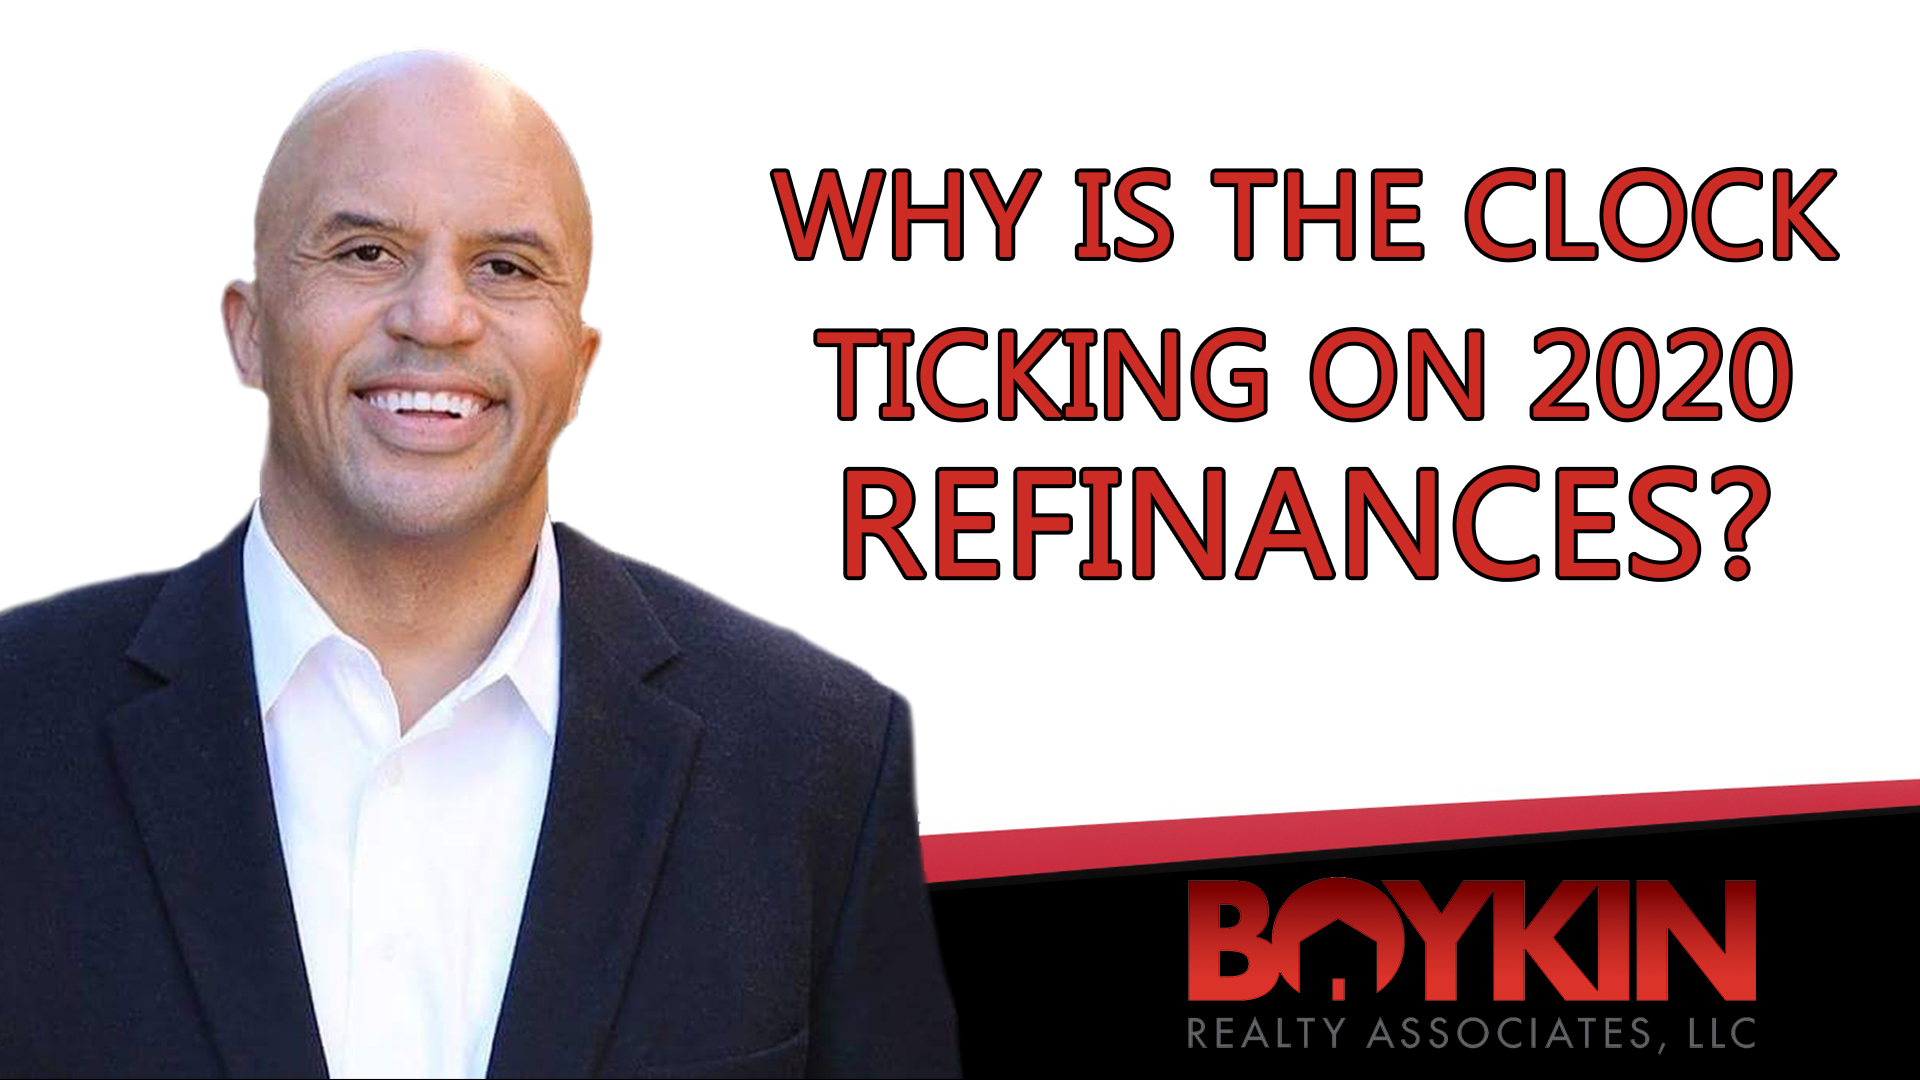 How to Save $11,000 on Your Refinance